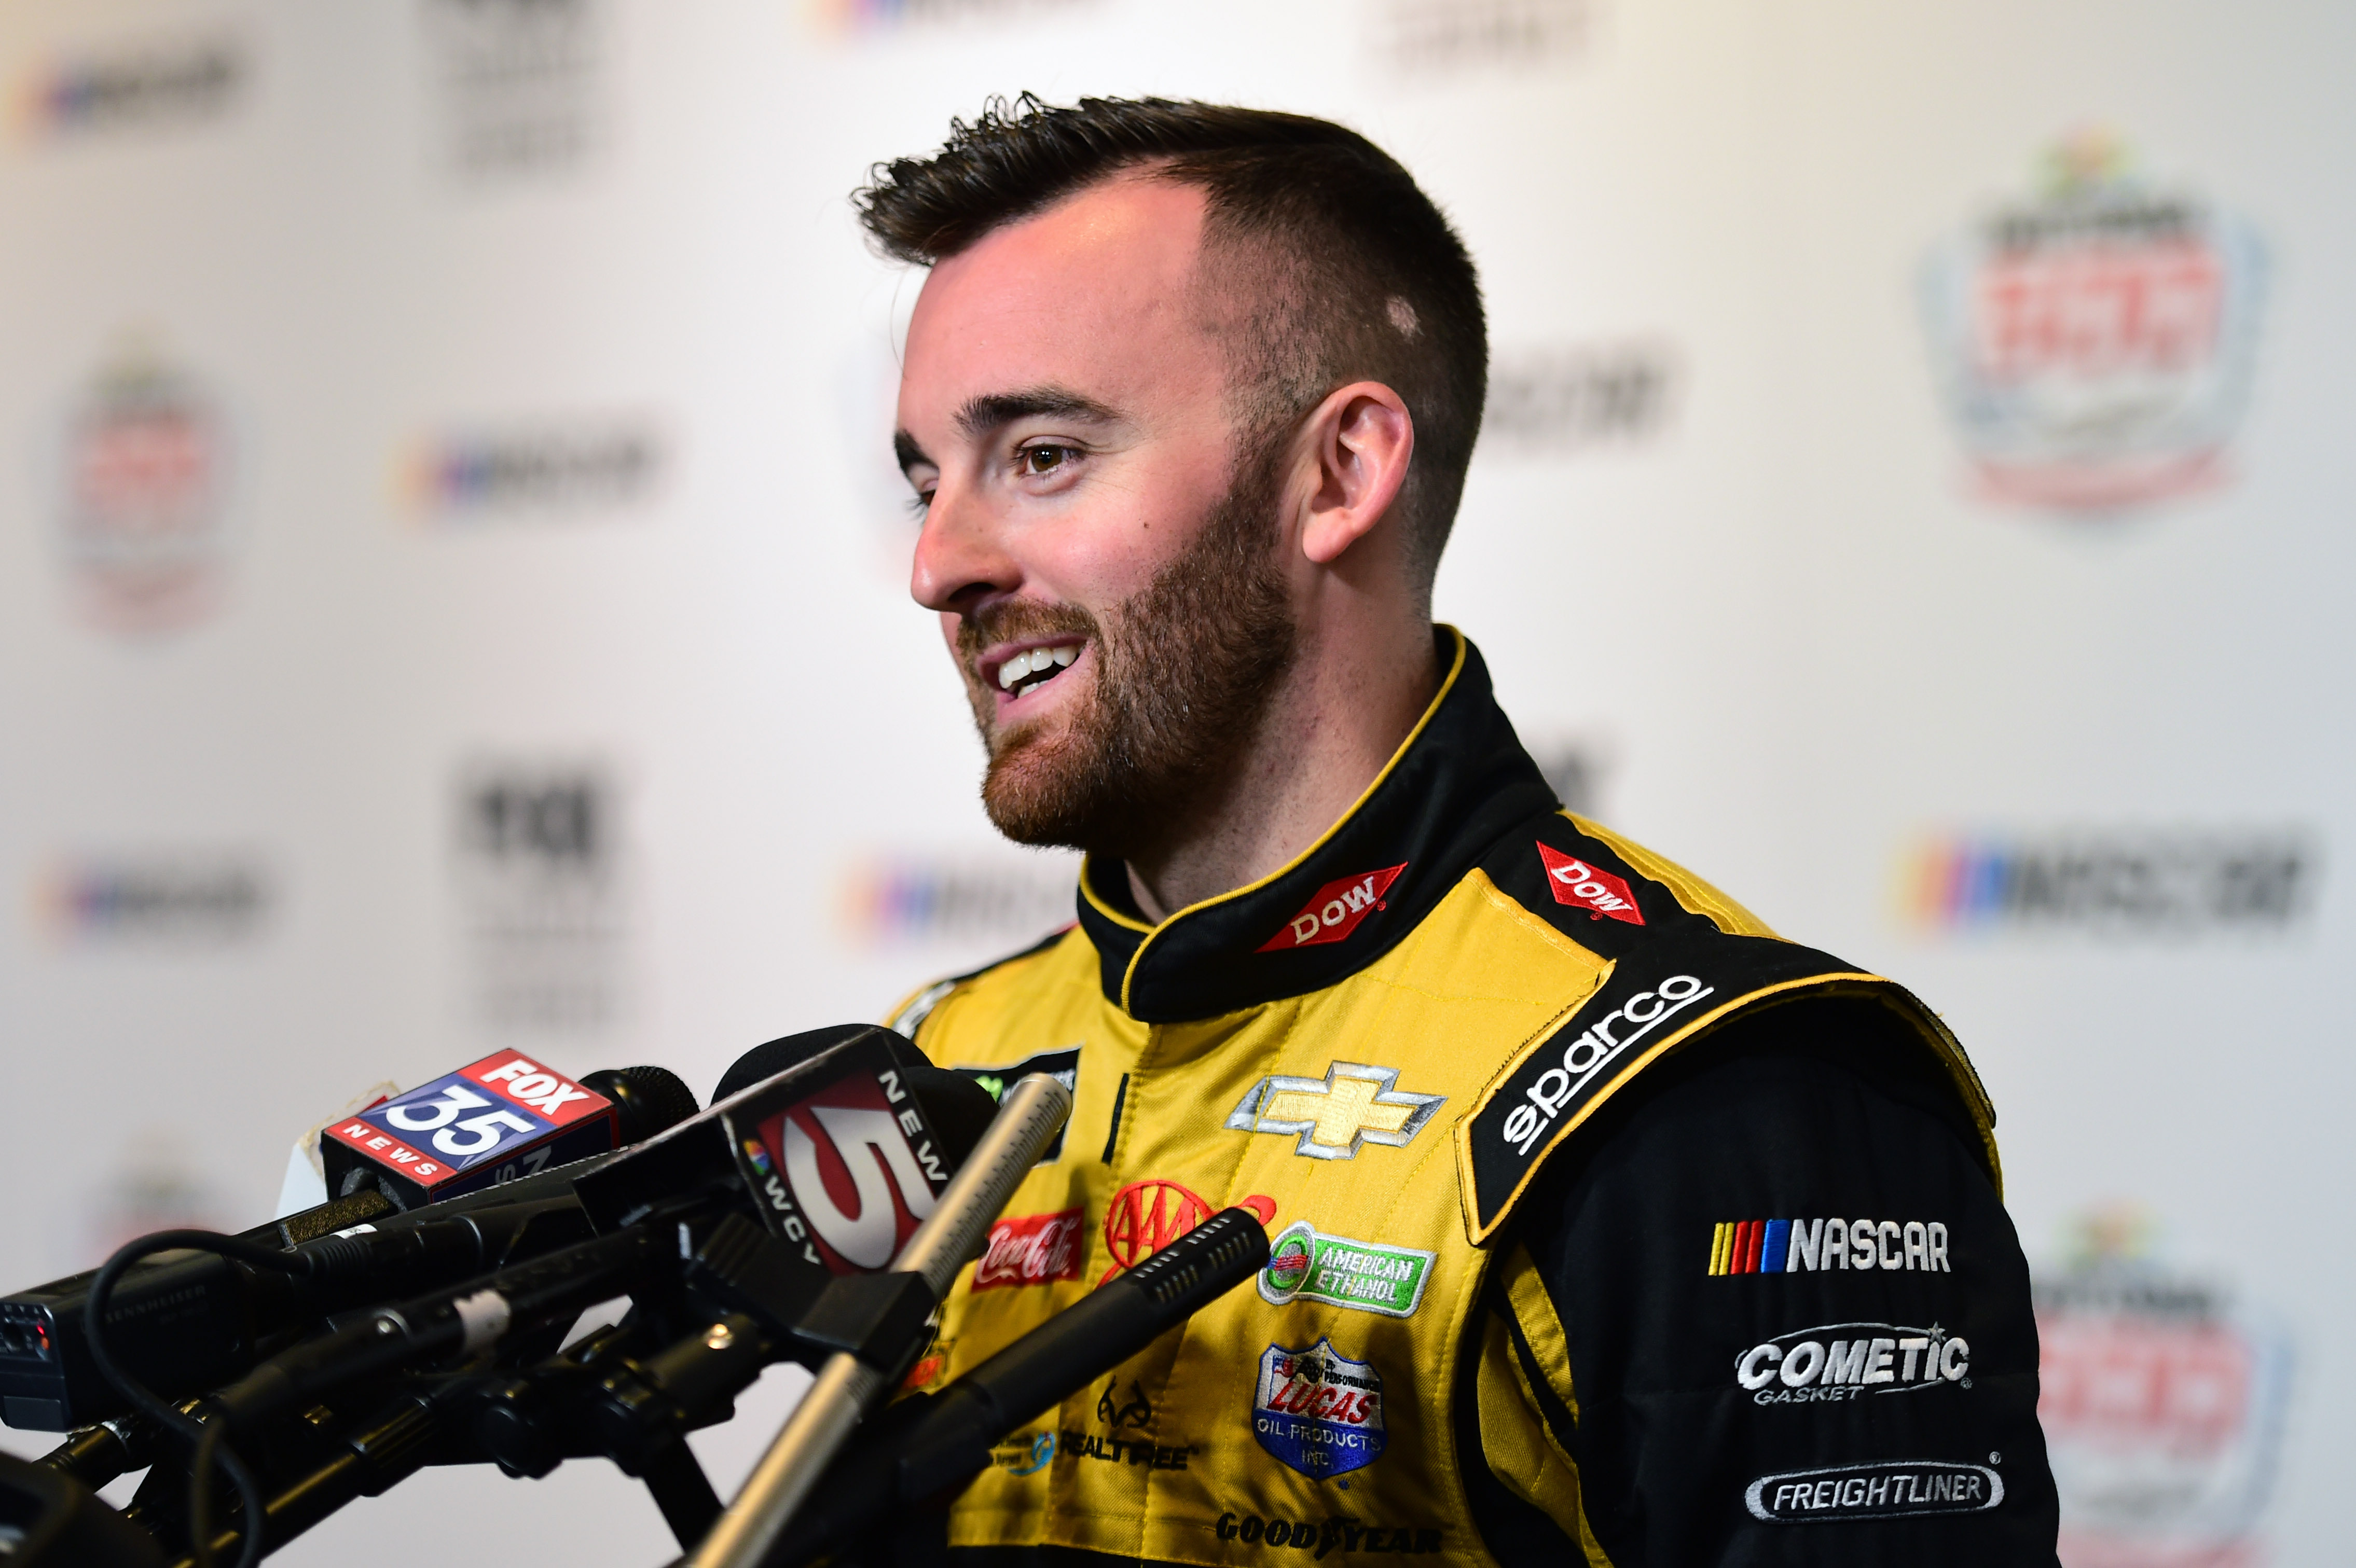 Can Austin Dillon Win the Daytona 500 in back-to-back Years?